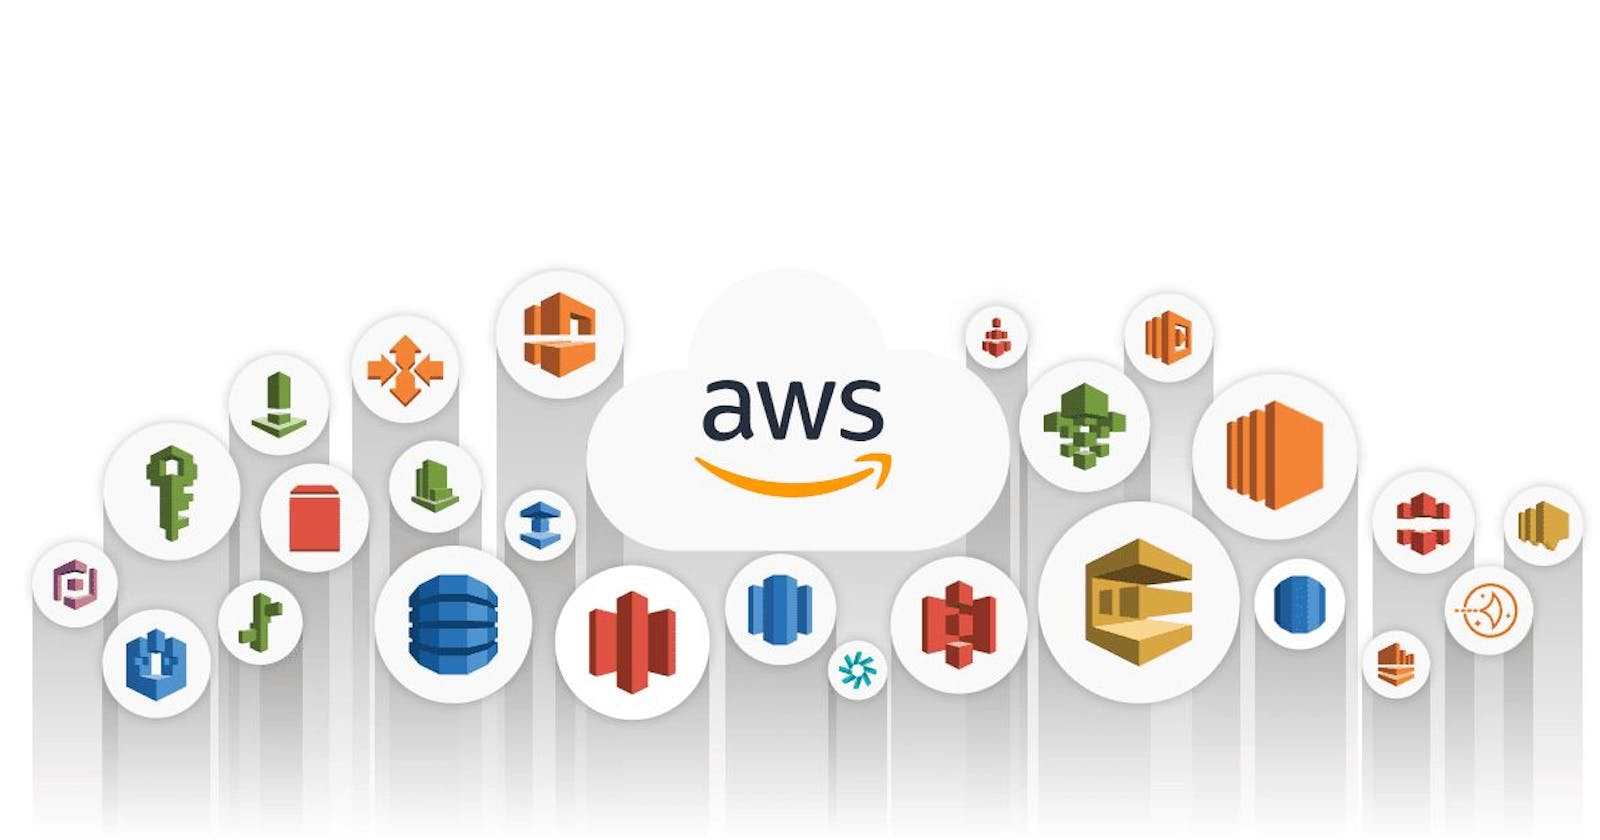 ⭐ 20 AWS Services Every DevOps Engineer Should Know ⭐